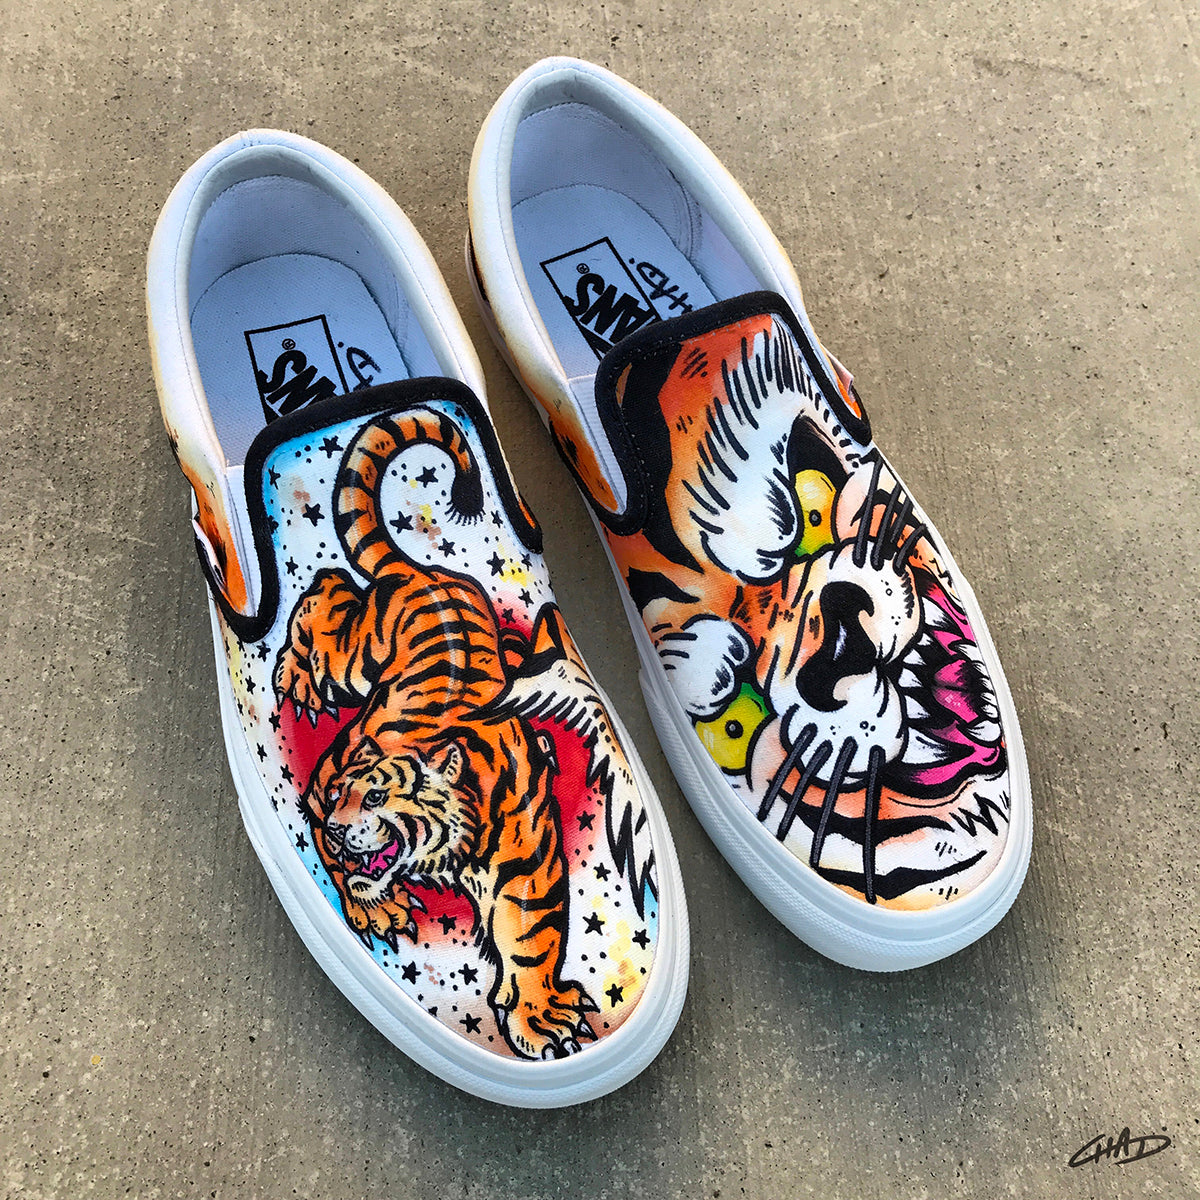 Pin on My Painted Shoes. Hand painted custom kicks on .